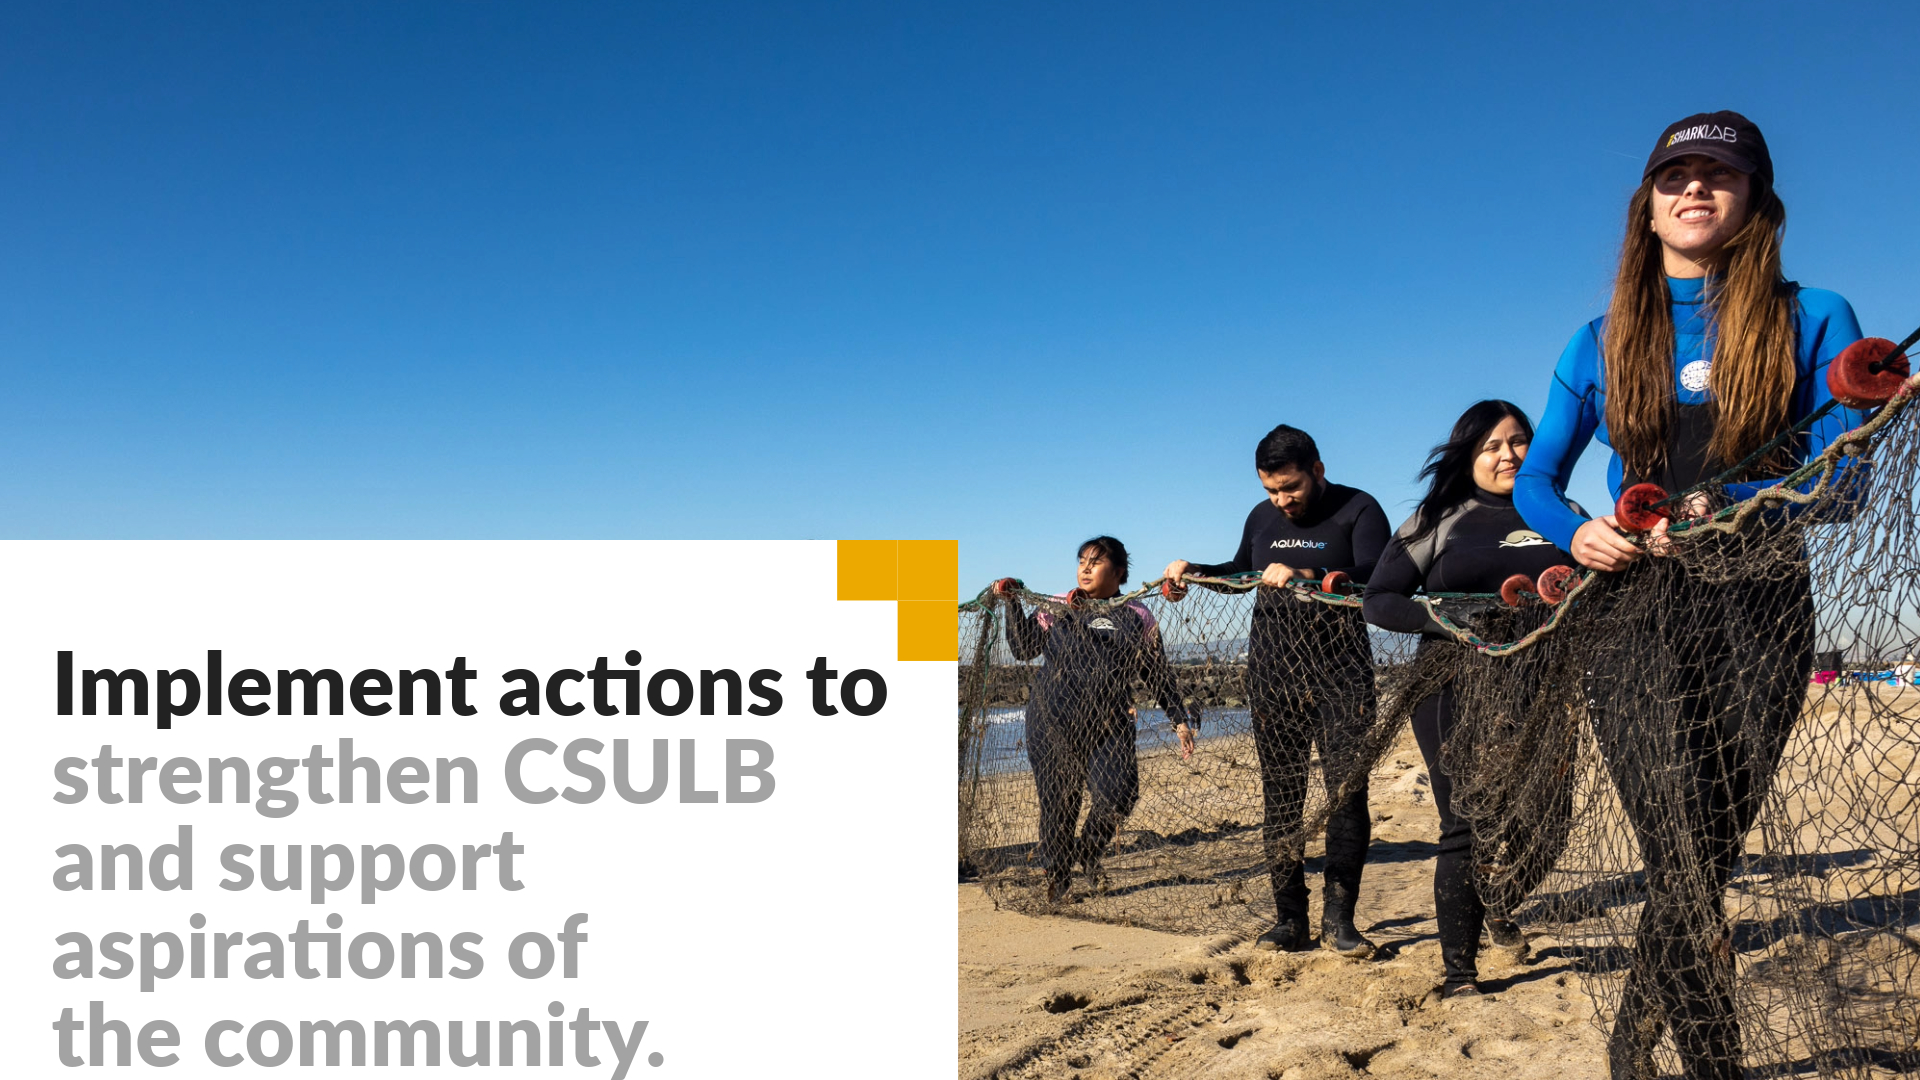 Implement actions that strengthen CSULB and support the aspirations of community members.